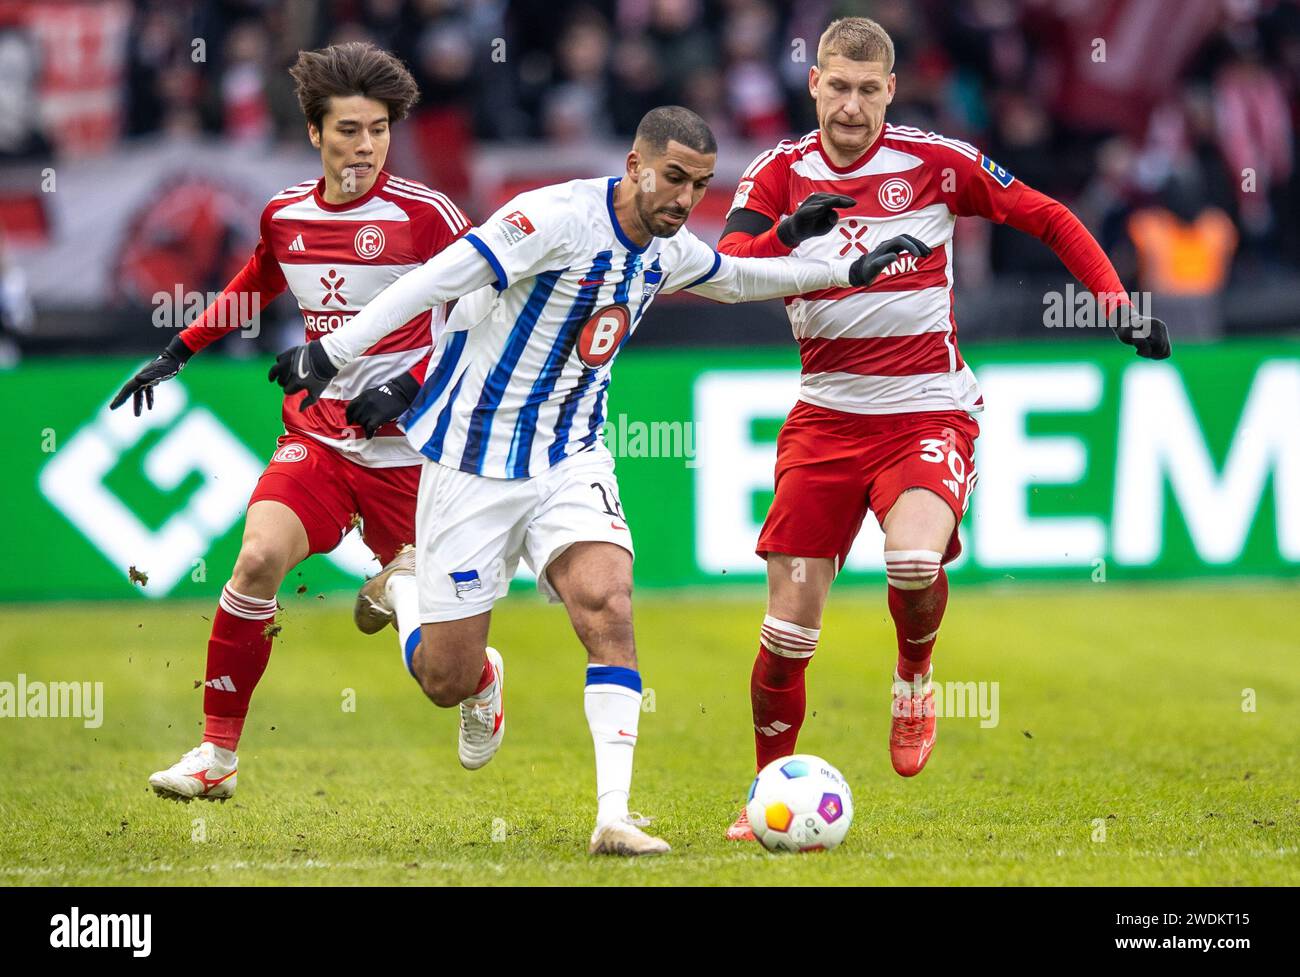 Berlin, Germany. 21st Jan, 2024. Soccer: Bundesliga 2, Hertha BSC - Fortuna Düsseldorf, Matchday 18, Olympiastadion. Berlin's Aymen Barkok (center) battles for the ball against Ao Tanaka (left) and Jordy de Wijs of Fortuna Düsseldorf. Credit: Andreas Gora/dpa - IMPORTANT NOTE: In accordance with the regulations of the DFL German Football League and the DFB German Football Association, it is prohibited to utilize or have utilized photographs taken in the stadium and/or of the match in the form of sequential images and/or video-like photo series./dpa/Alamy Live News Stock Photo